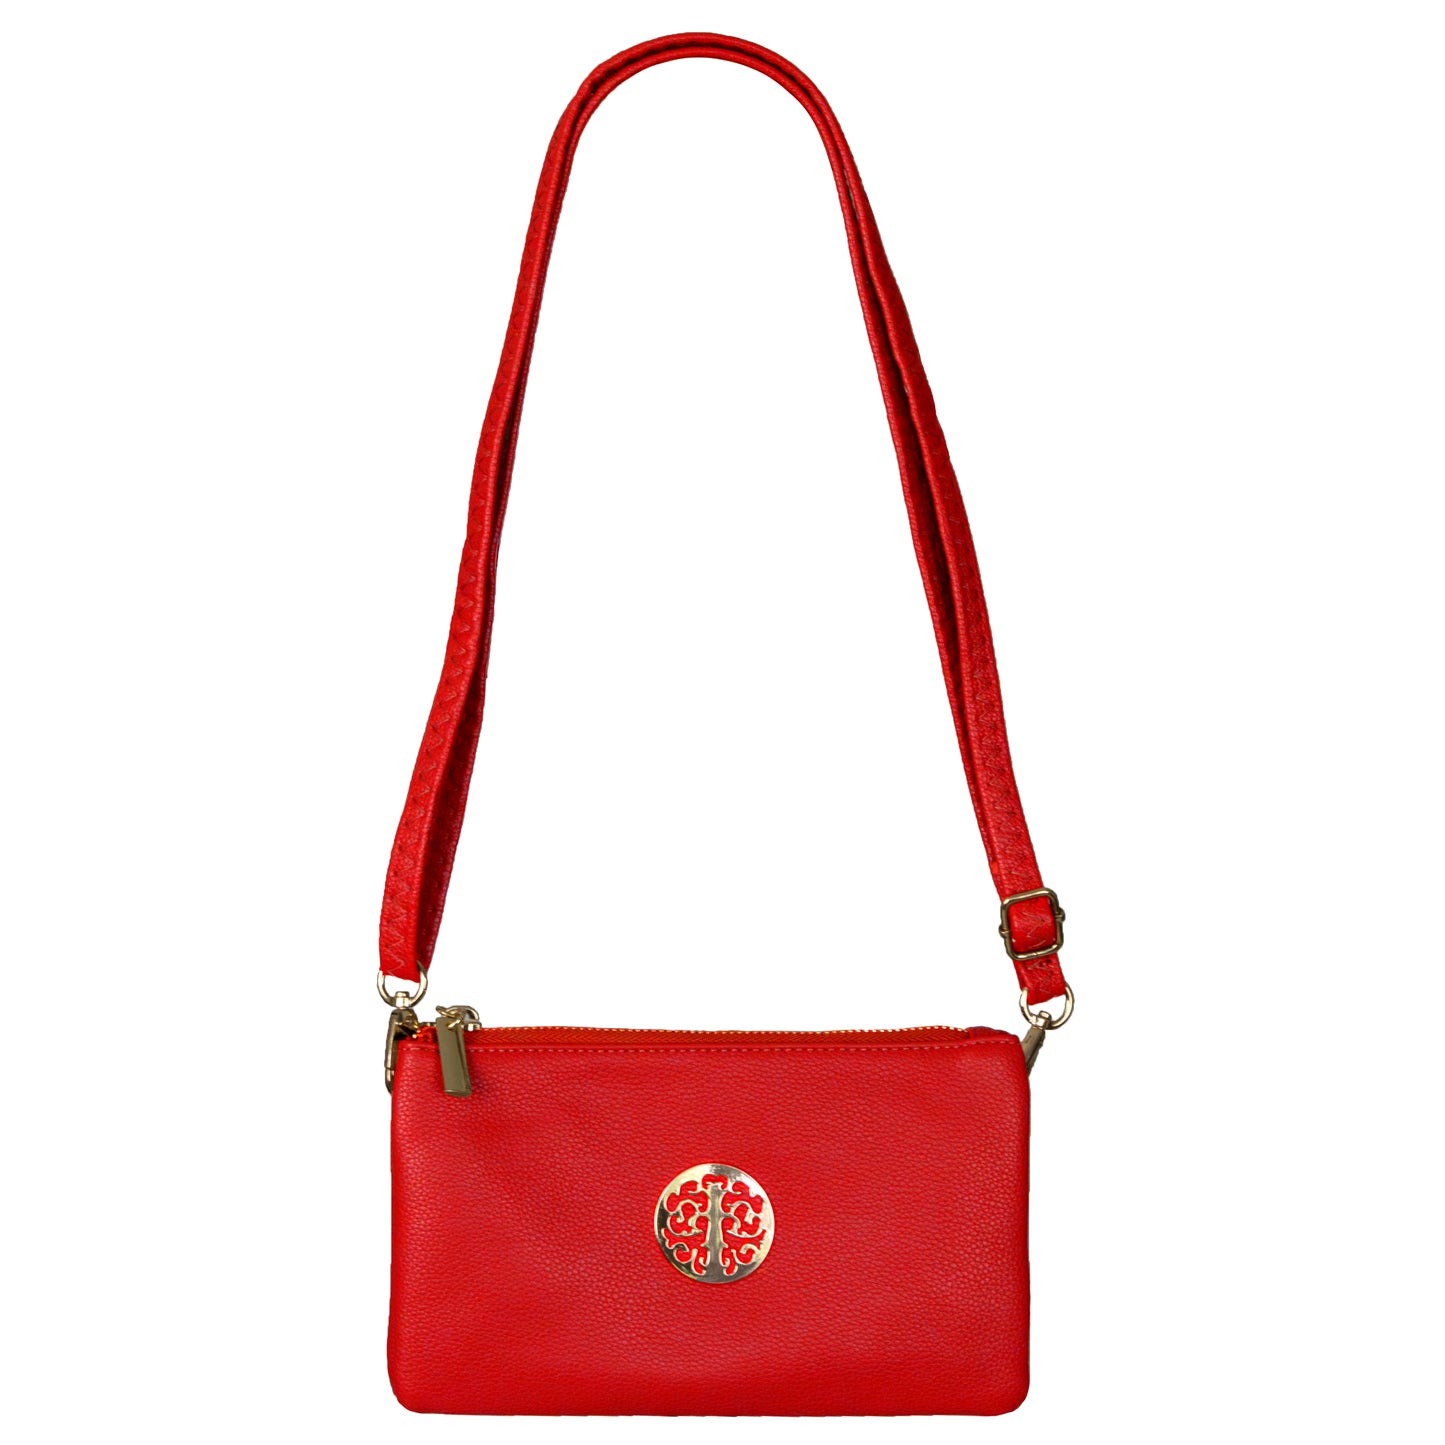 2in1 Small Shoulder Bag and Wrist Bag